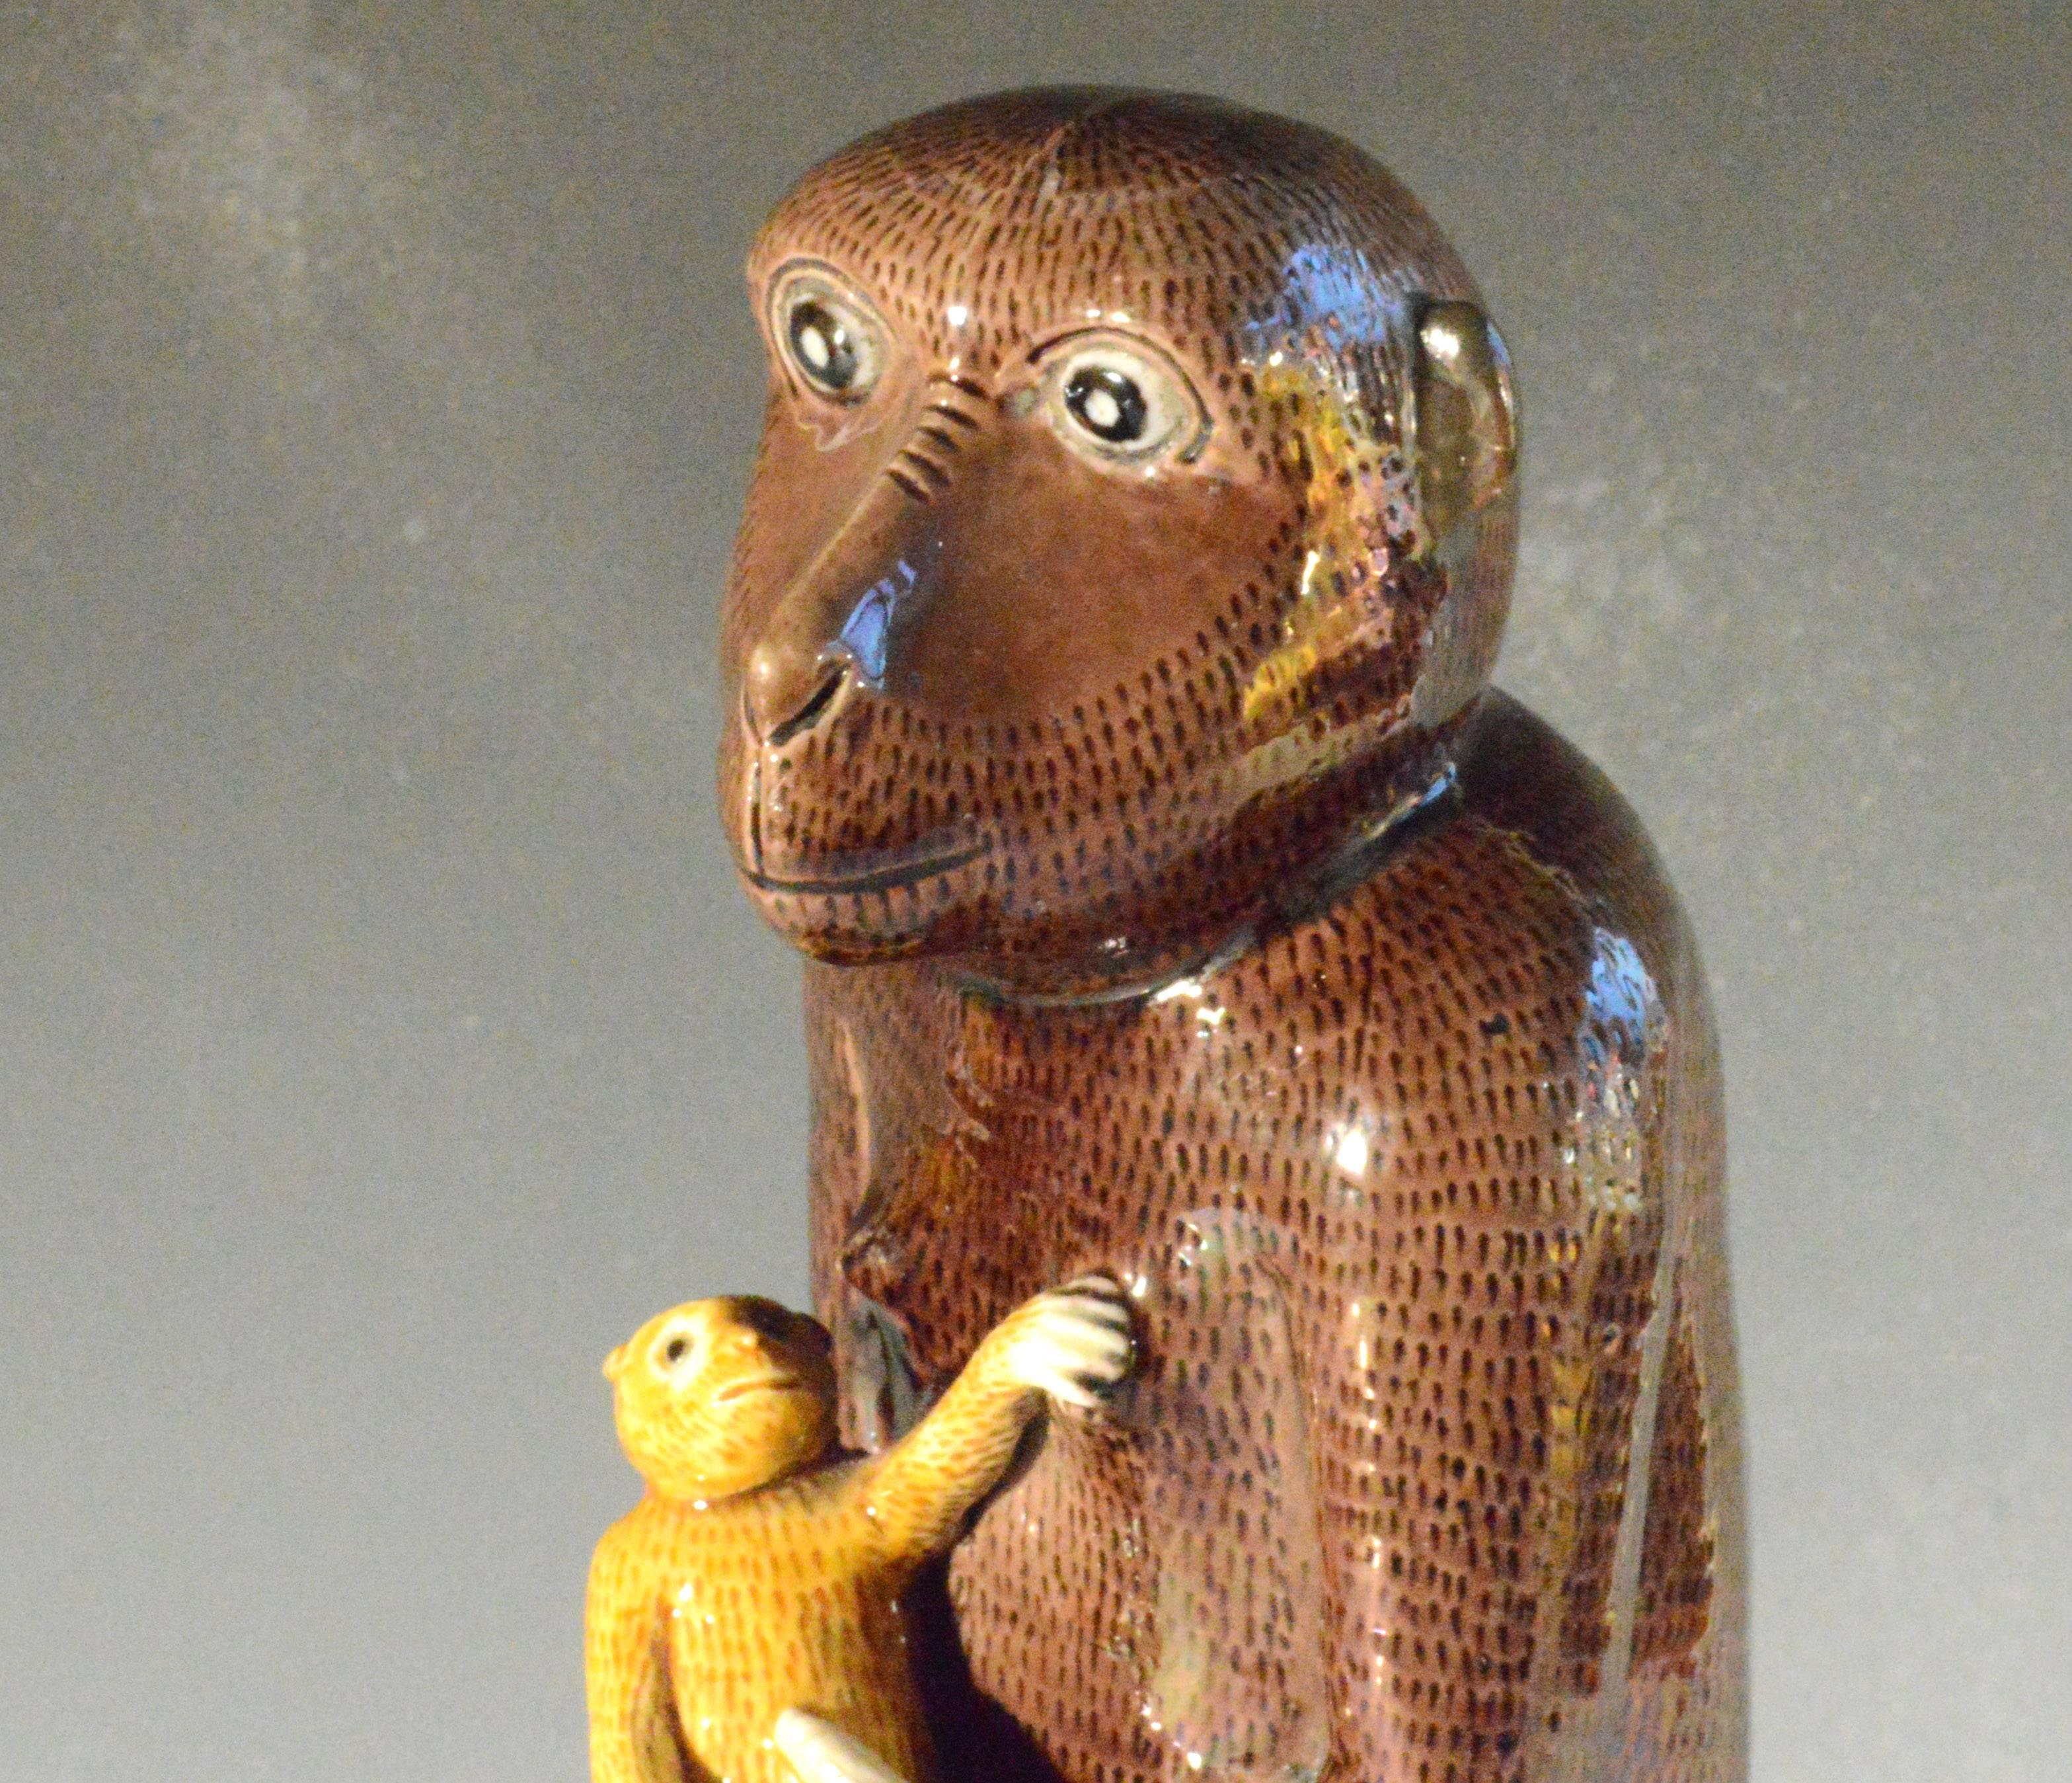 18th Century Chinese Export Glazed Biscuit Model of Monkey, 18th-Early 19th Century